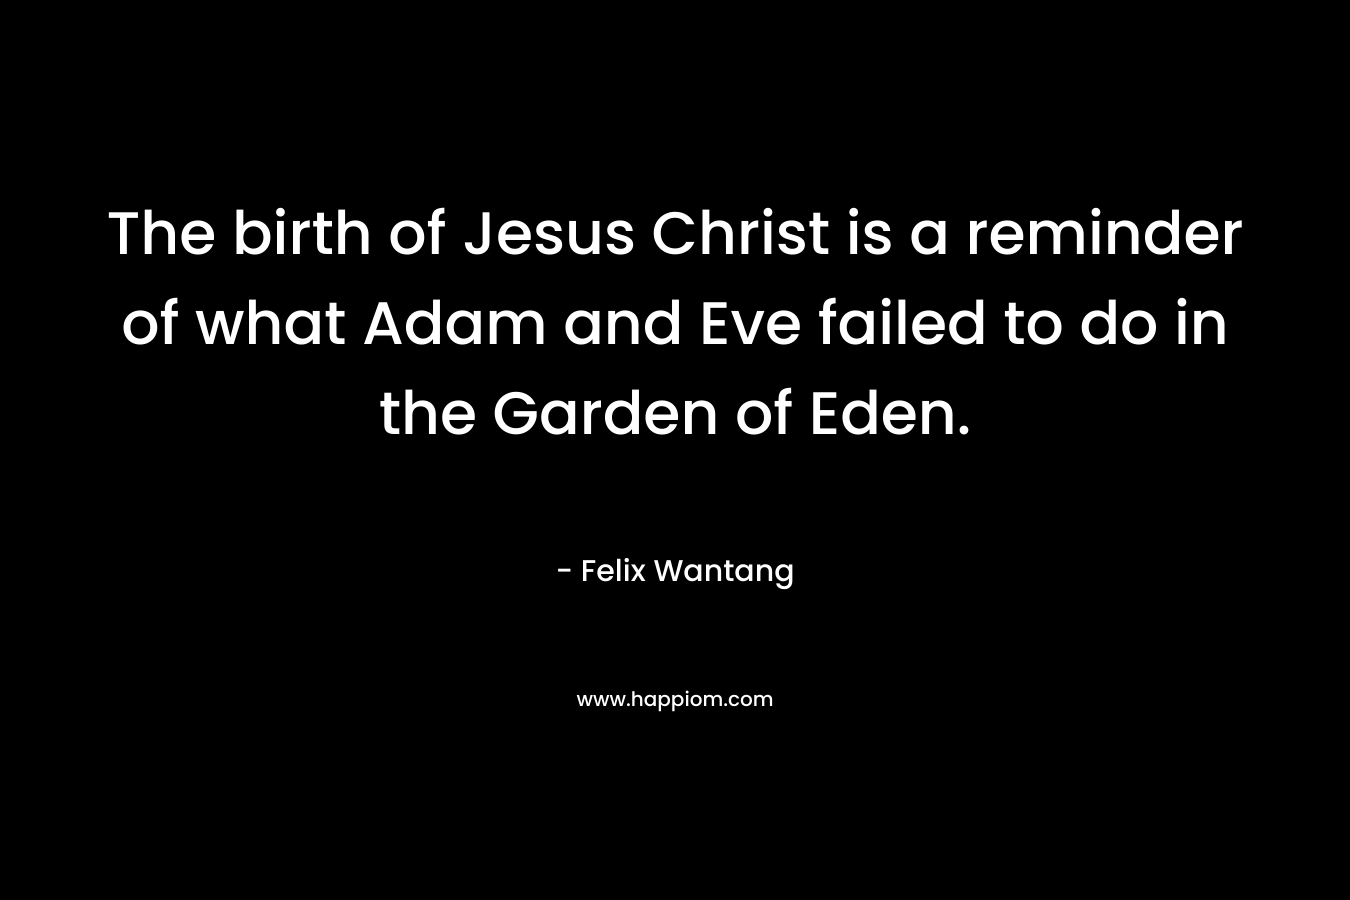 The birth of Jesus Christ is a reminder of what Adam and Eve failed to do in the Garden of Eden. – Felix Wantang